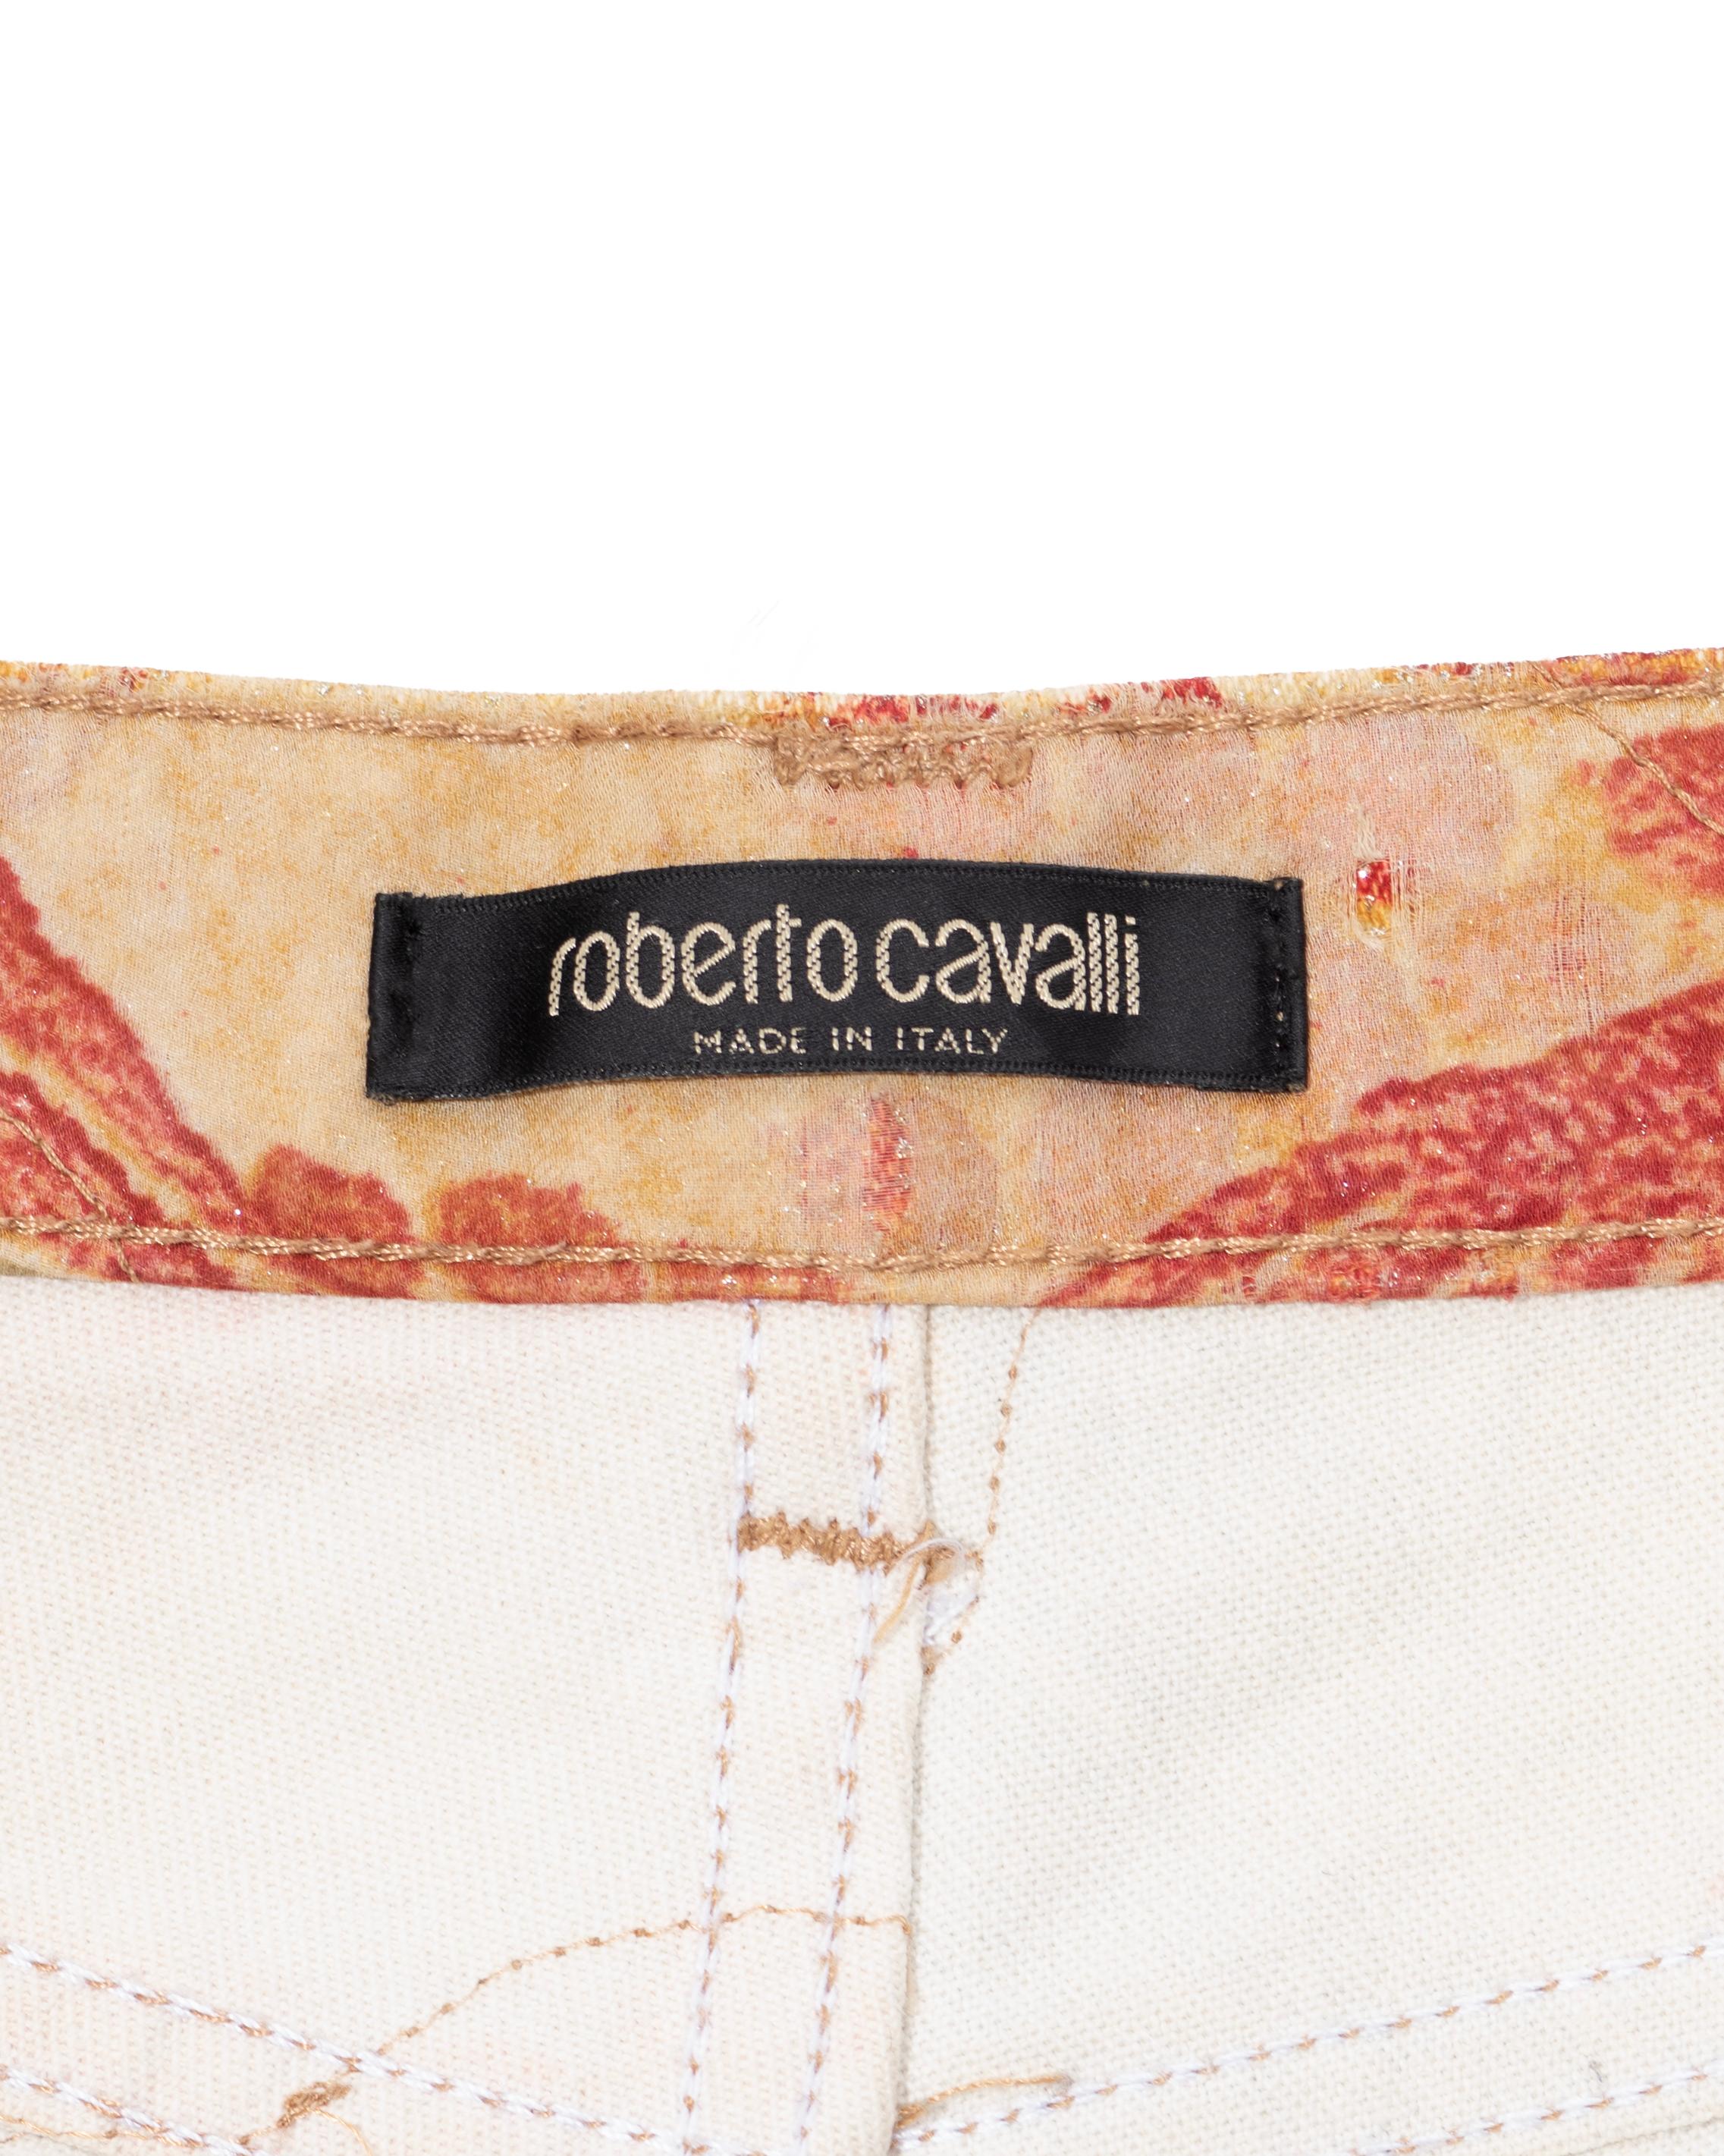 Roberto Cavalli Baroque Cotton Pants With Distressed Silk Overlay, fw 2001 For Sale 6